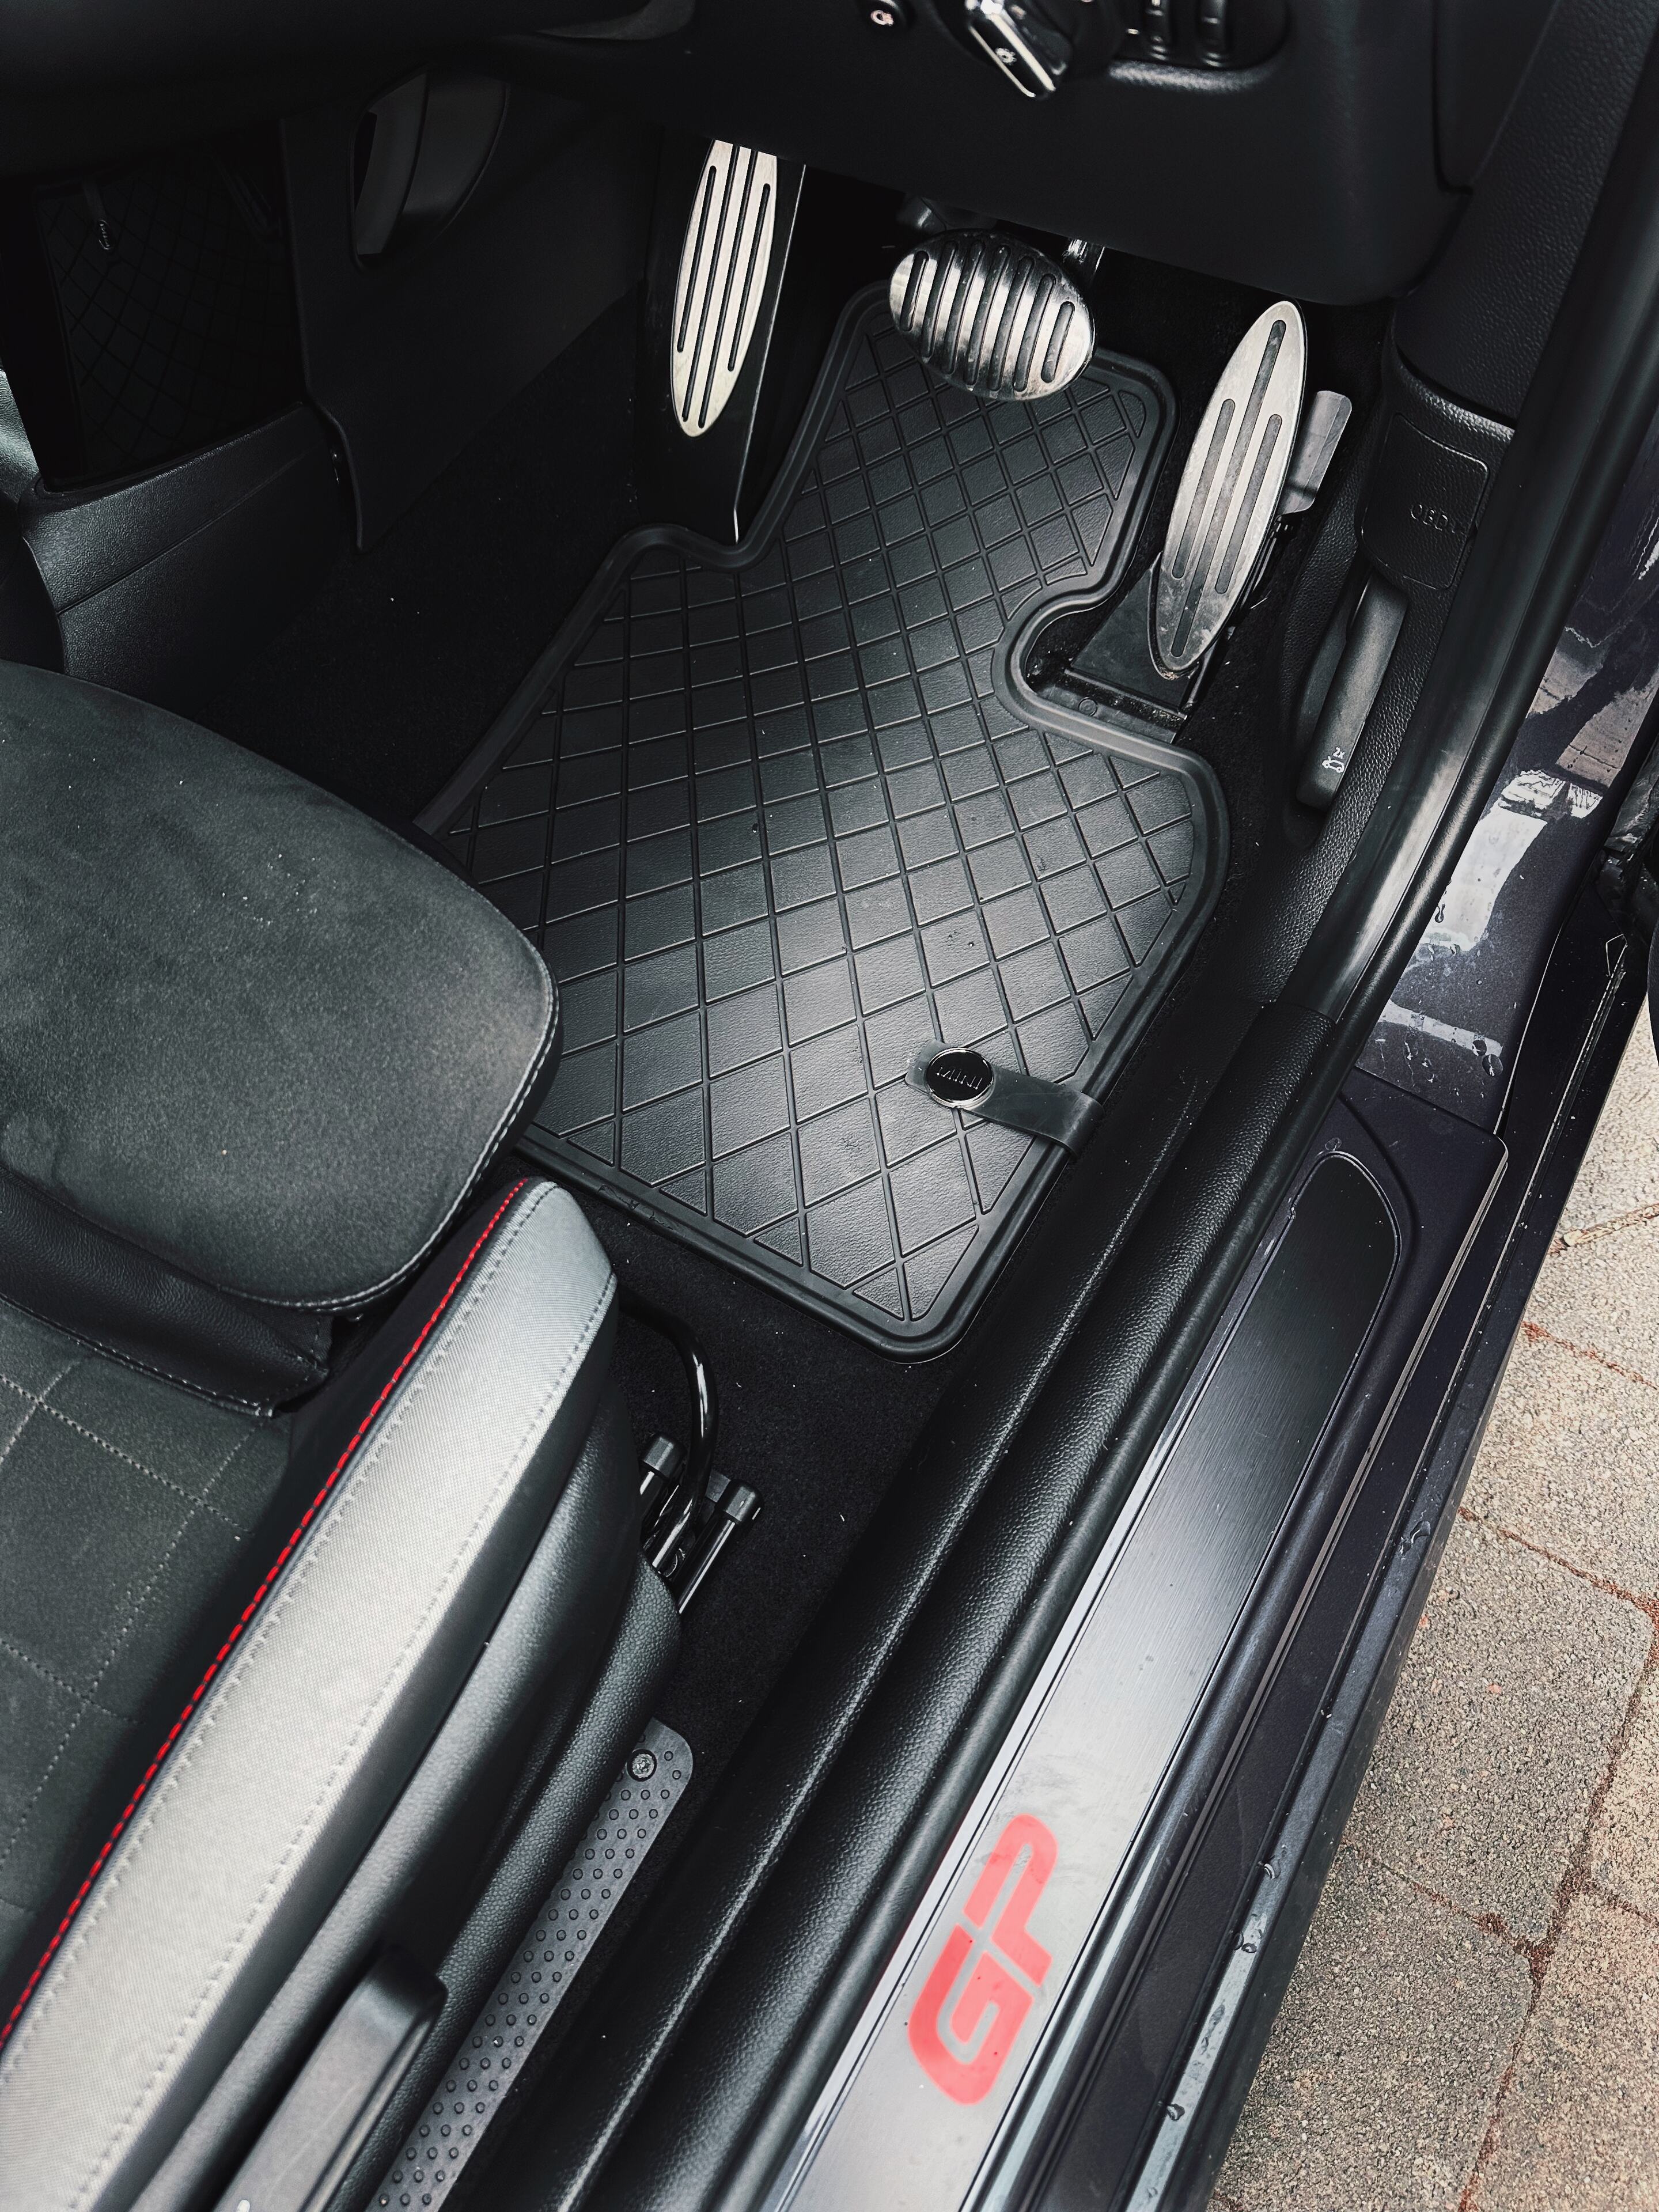 Pistonheads - The image displays the interior of a vehicle, specifically focusing on the front passenger side. There is a sports car seat visible, with red and black accents, suggesting a high-performance theme. A gear shift knob is prominently positioned within easy reach, indicating the car's manual transmission system. The floor mats feature a distinctive checkered pattern, adding to the sporty aesthetic of the vehicle. The overall design and elements suggest a customized or tuned vehicle, possibly used for racing or performance driving.